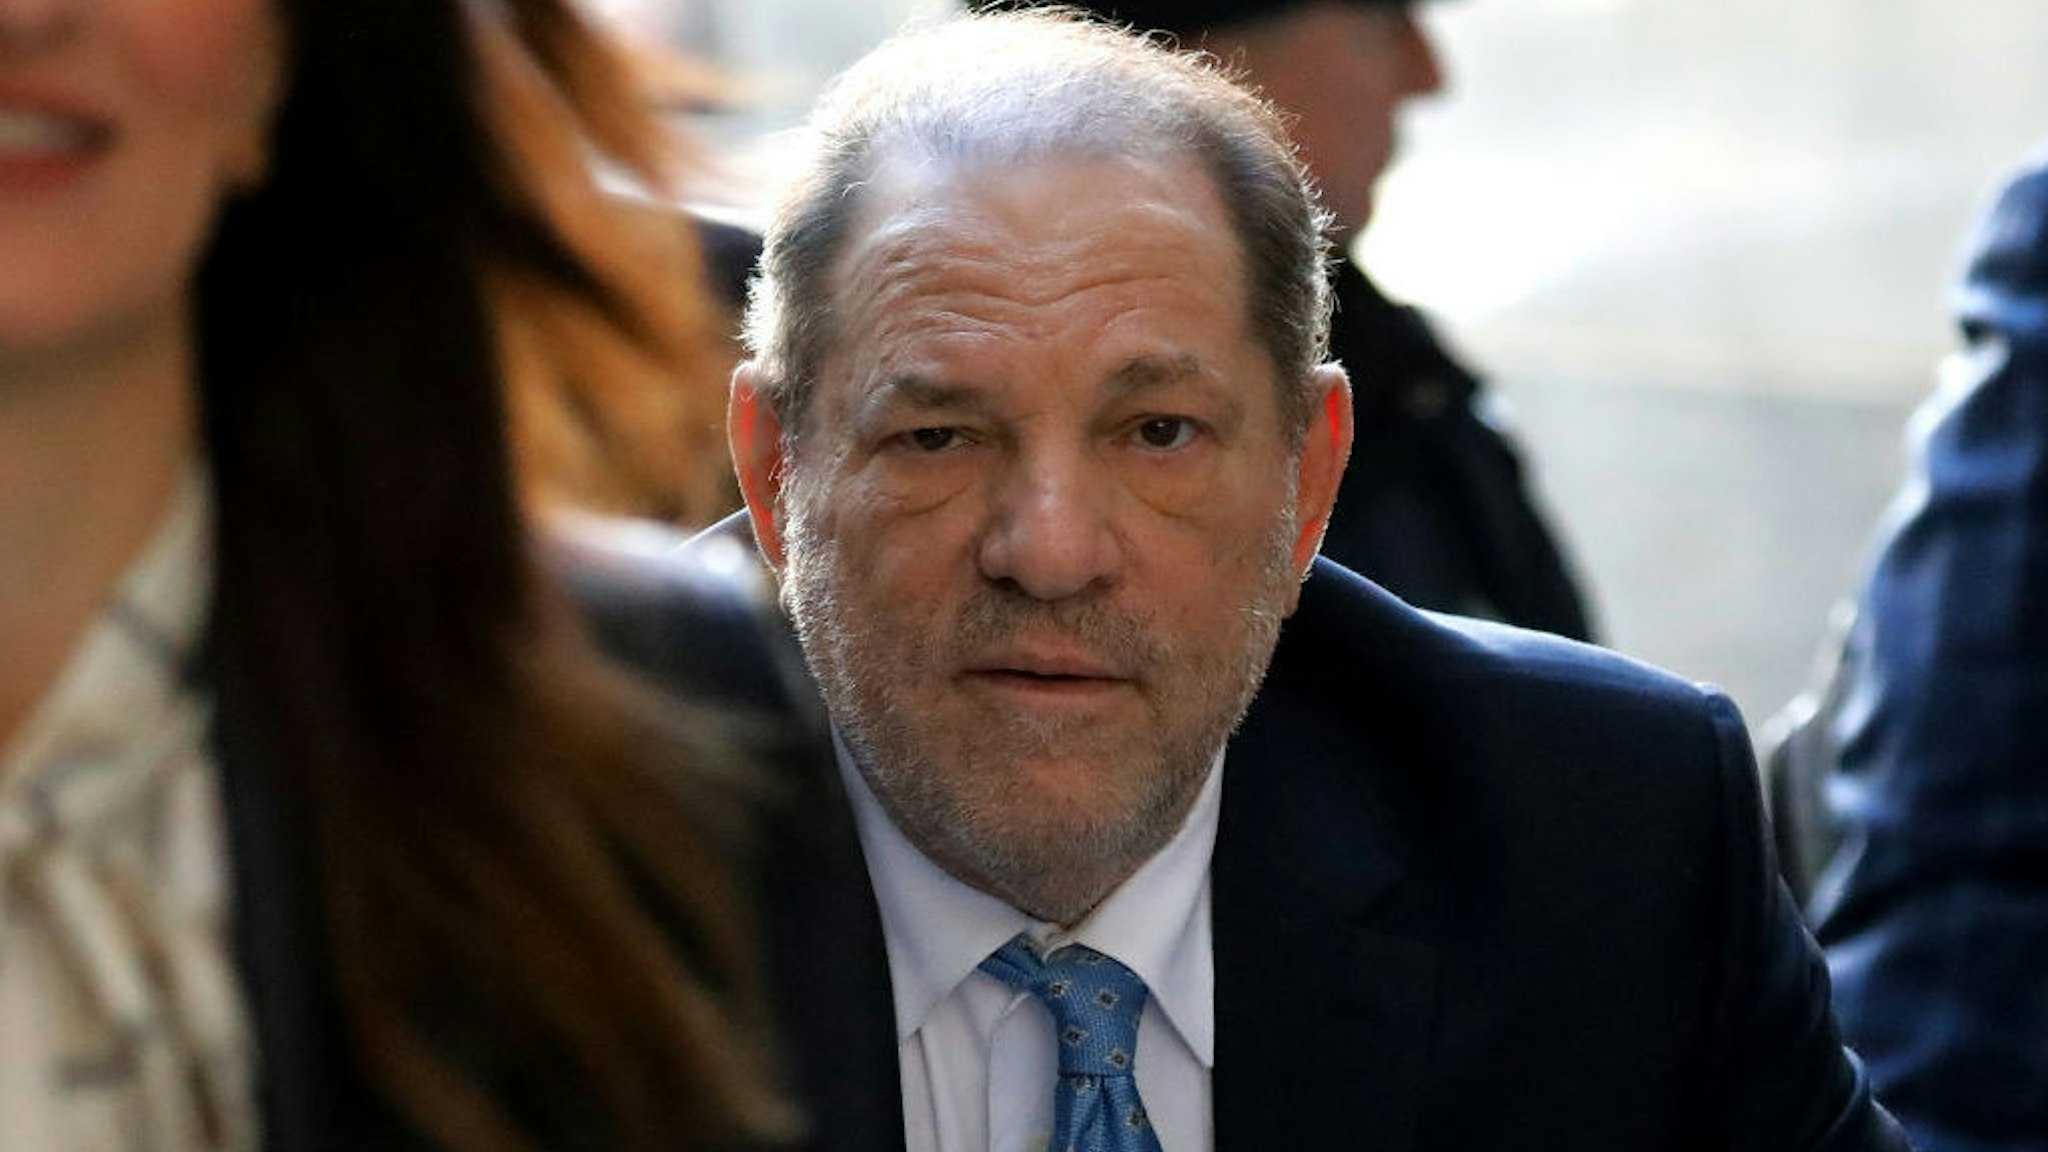 Harvey Weinstein, former co-chairman of the Weinstein Co., center, arrives at state supreme court in New York, U.S., on Monday, Feb. 24, 2020. Jurors at Weinstein's trial are set to resume deliberations Monday after signaling they are at odds on the top charges, AP reports. Photographer: Peter Foley/Bloomberg